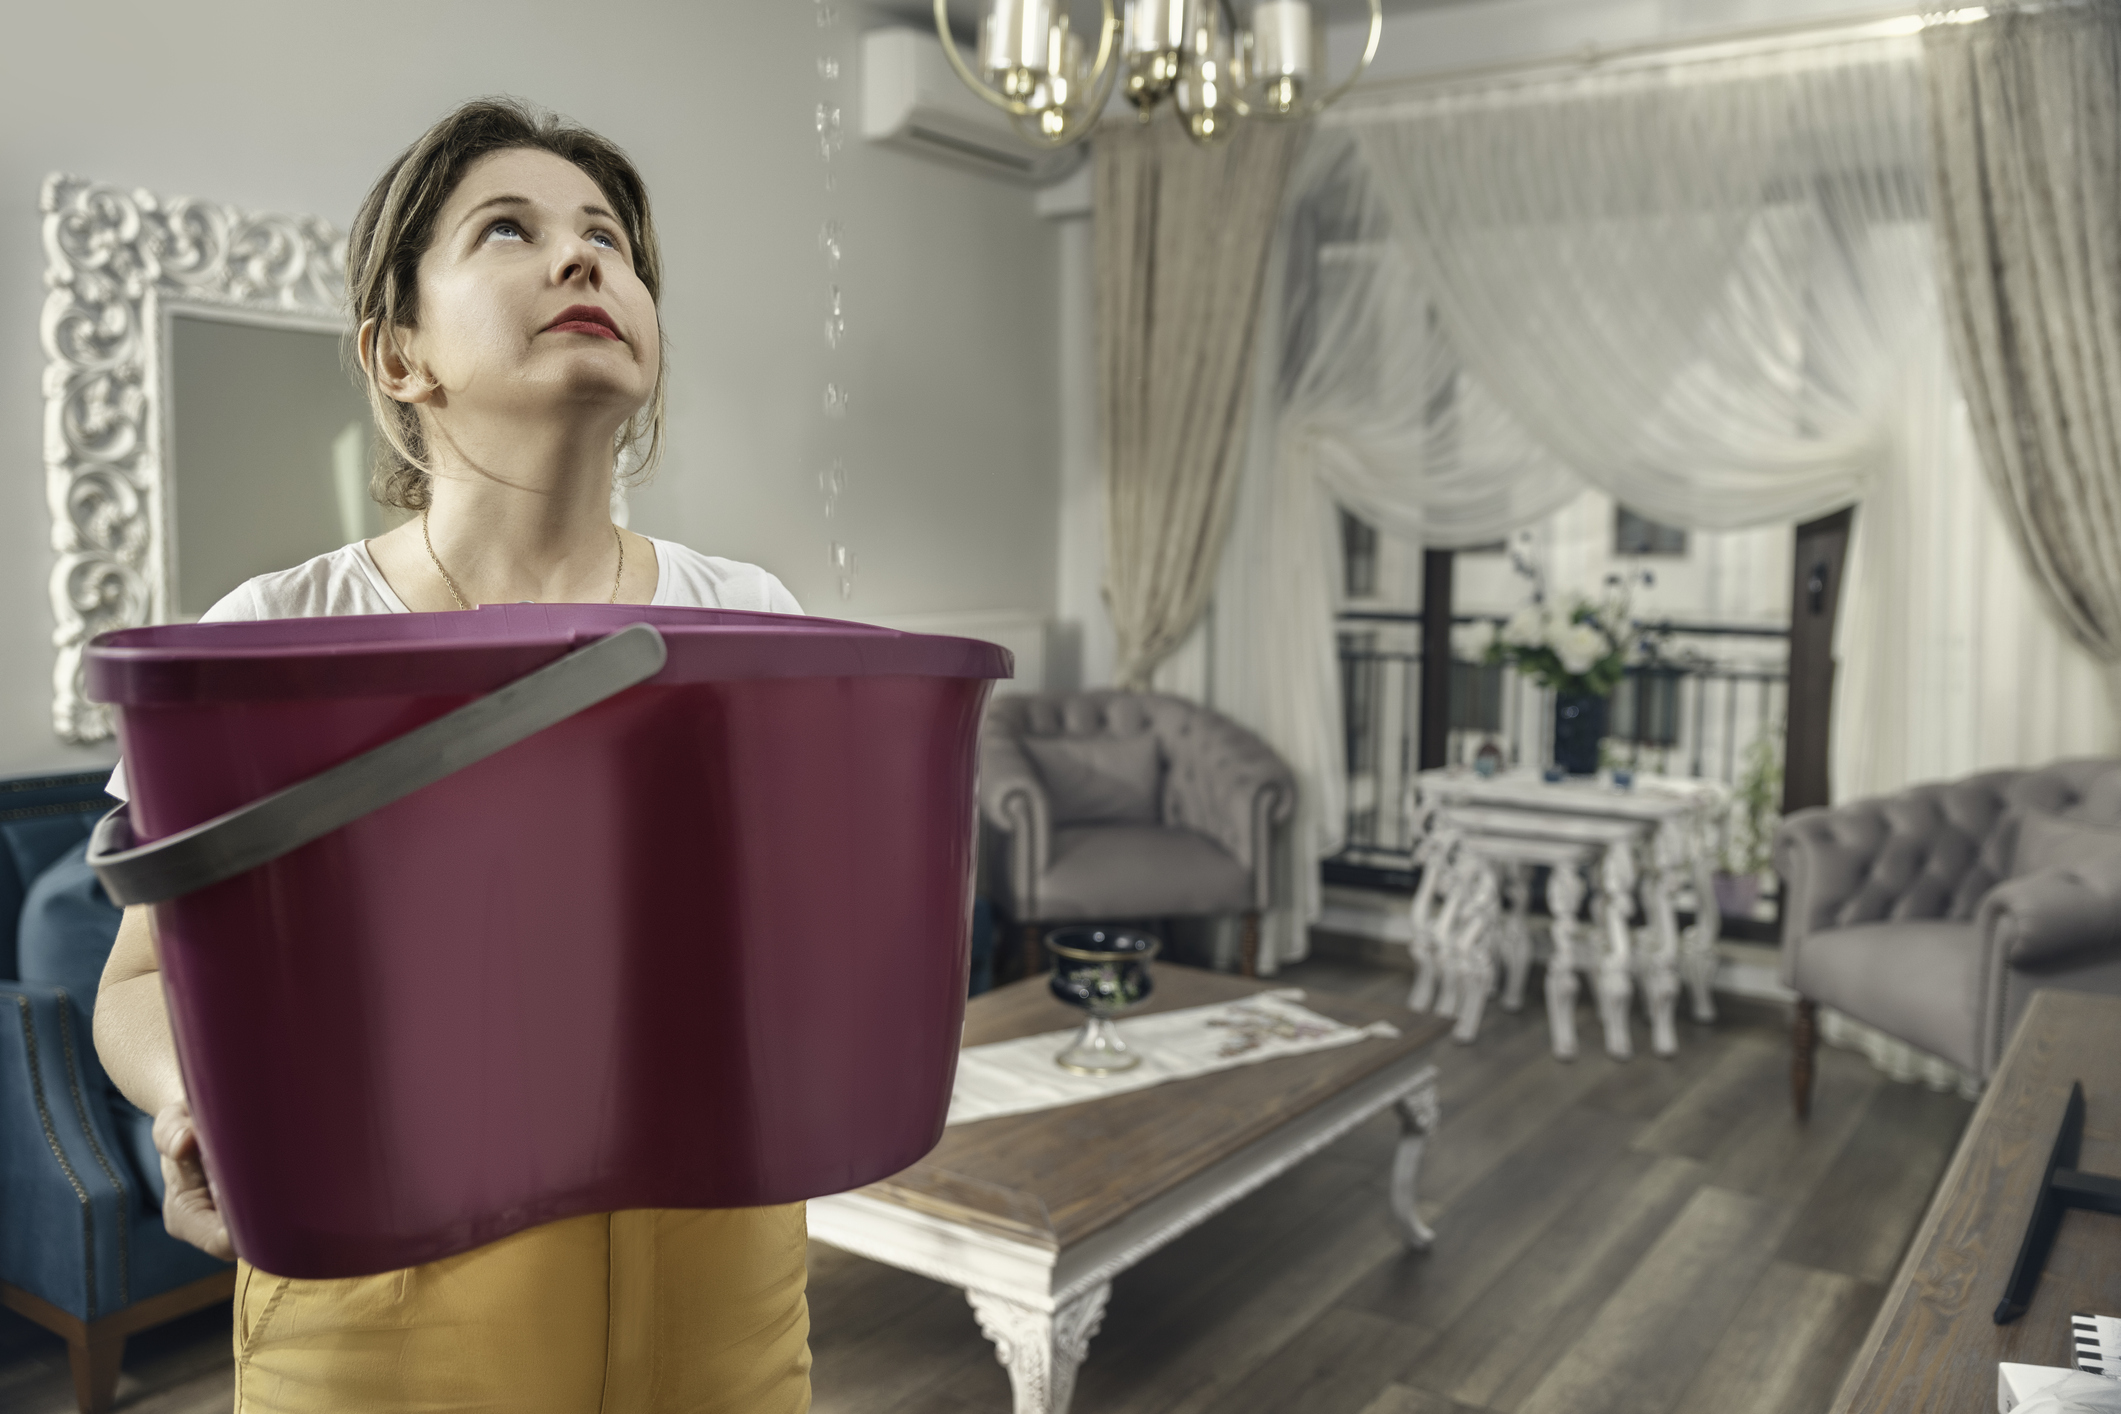 House Ceiling is Flowing - Woman Holding Bucket While Water Droplets Leak From Ceiling